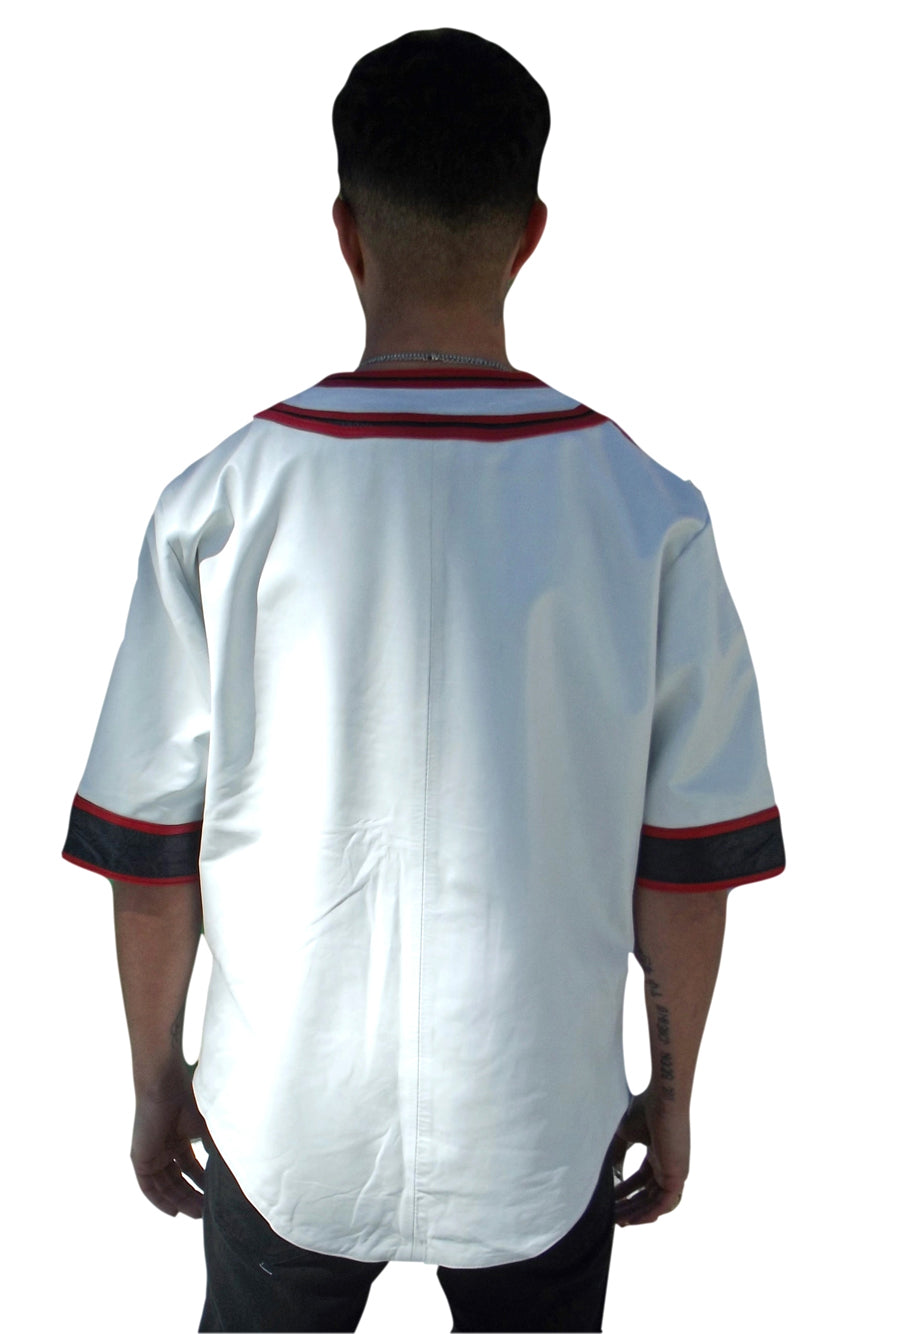 Snakeskin Baseball Jersey - Sheepskin Leather with Embossed Accents-  ChersDelights Leather Apparel